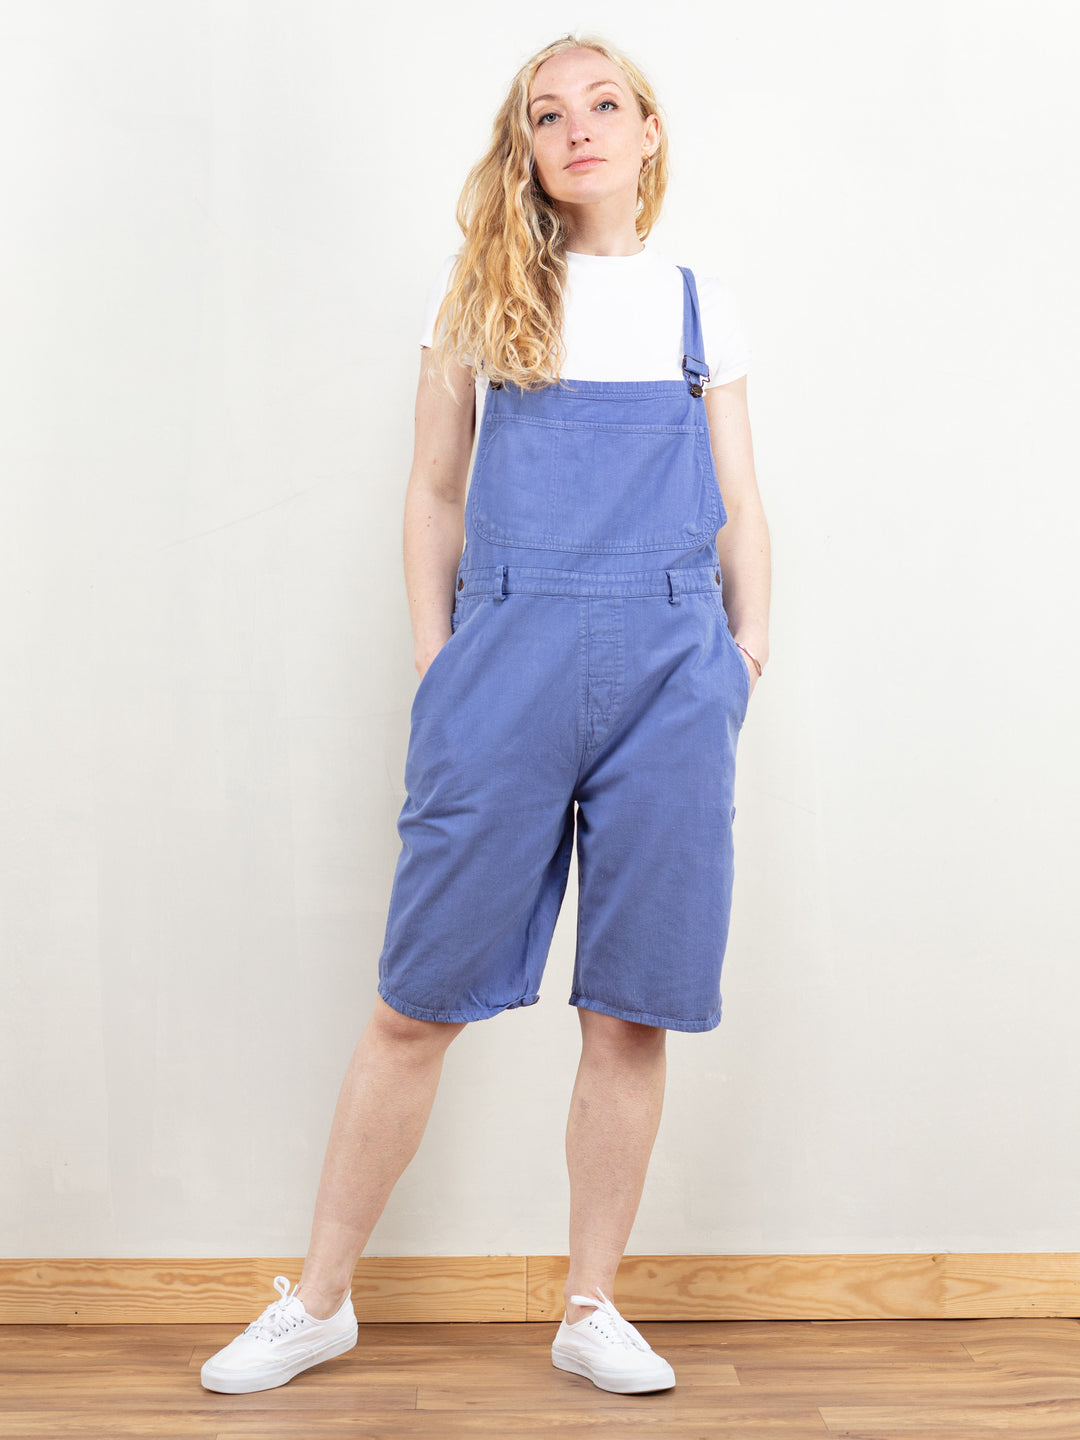 Purple Overalls Shorts boiler suit women shortalls pastel purple coverall dungaree spring jumpsuit playsuit romper summer wear size small